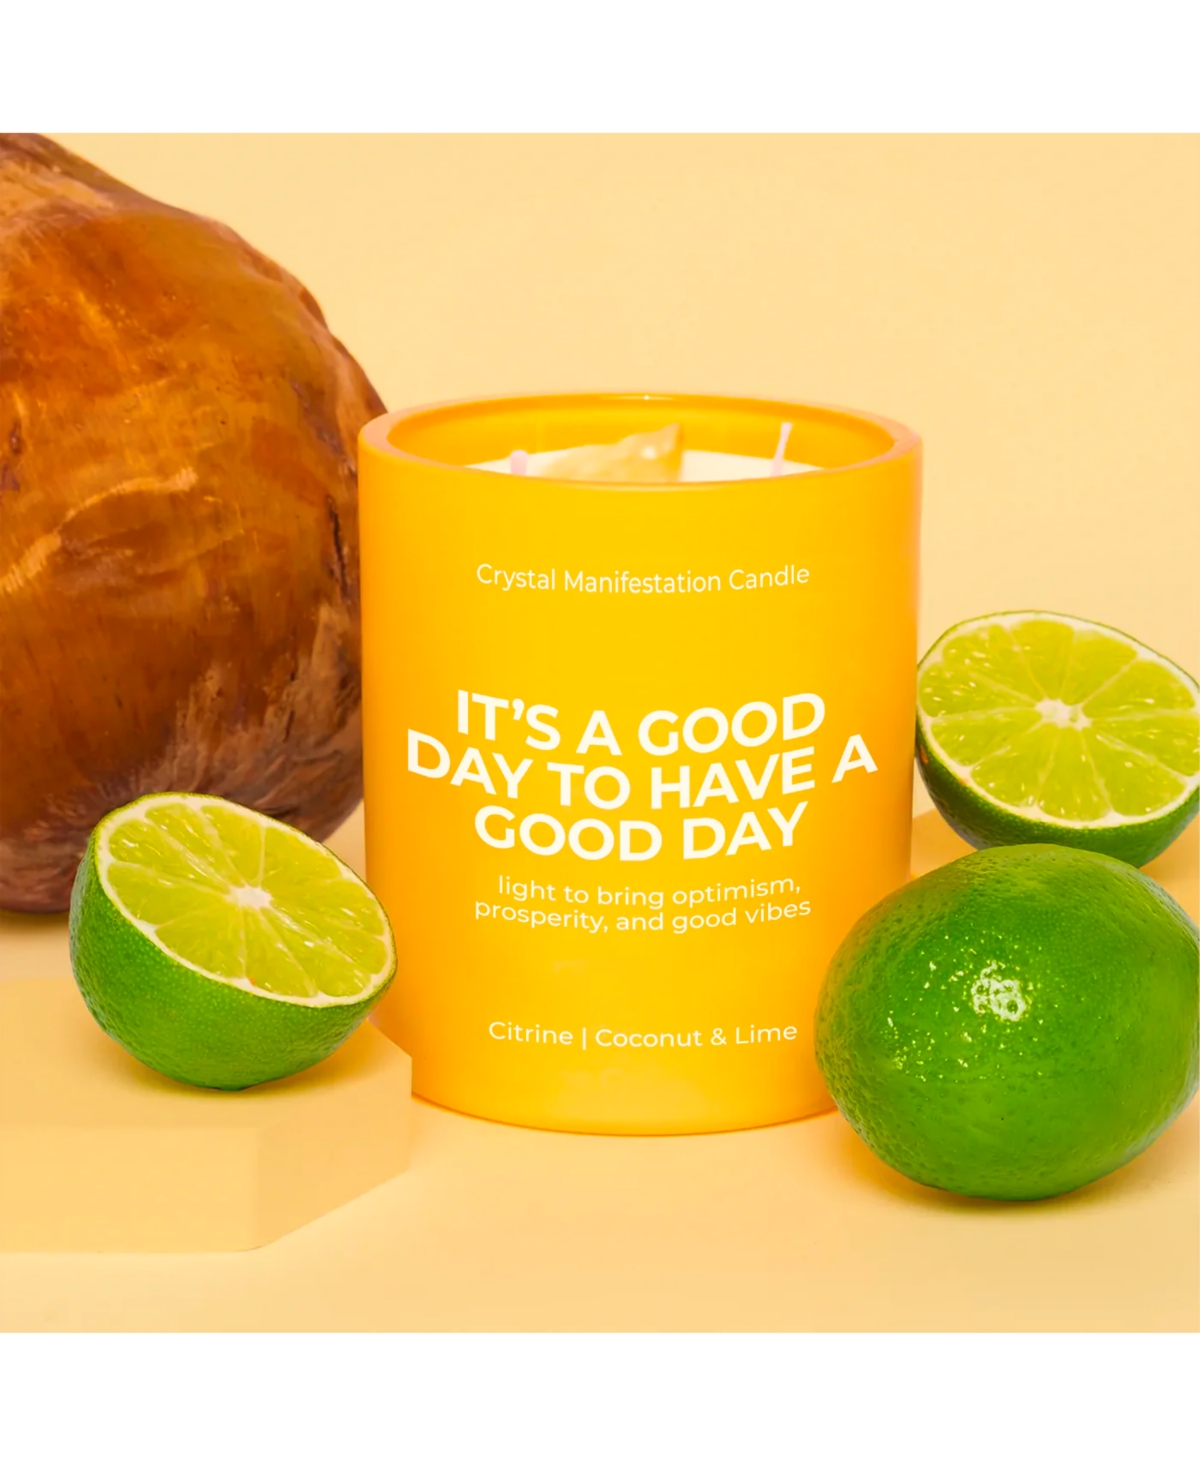 It's A Good Day to Have a Good Day Crystal Manifestation Candle - Coconut and Lime with Citrine - Orange